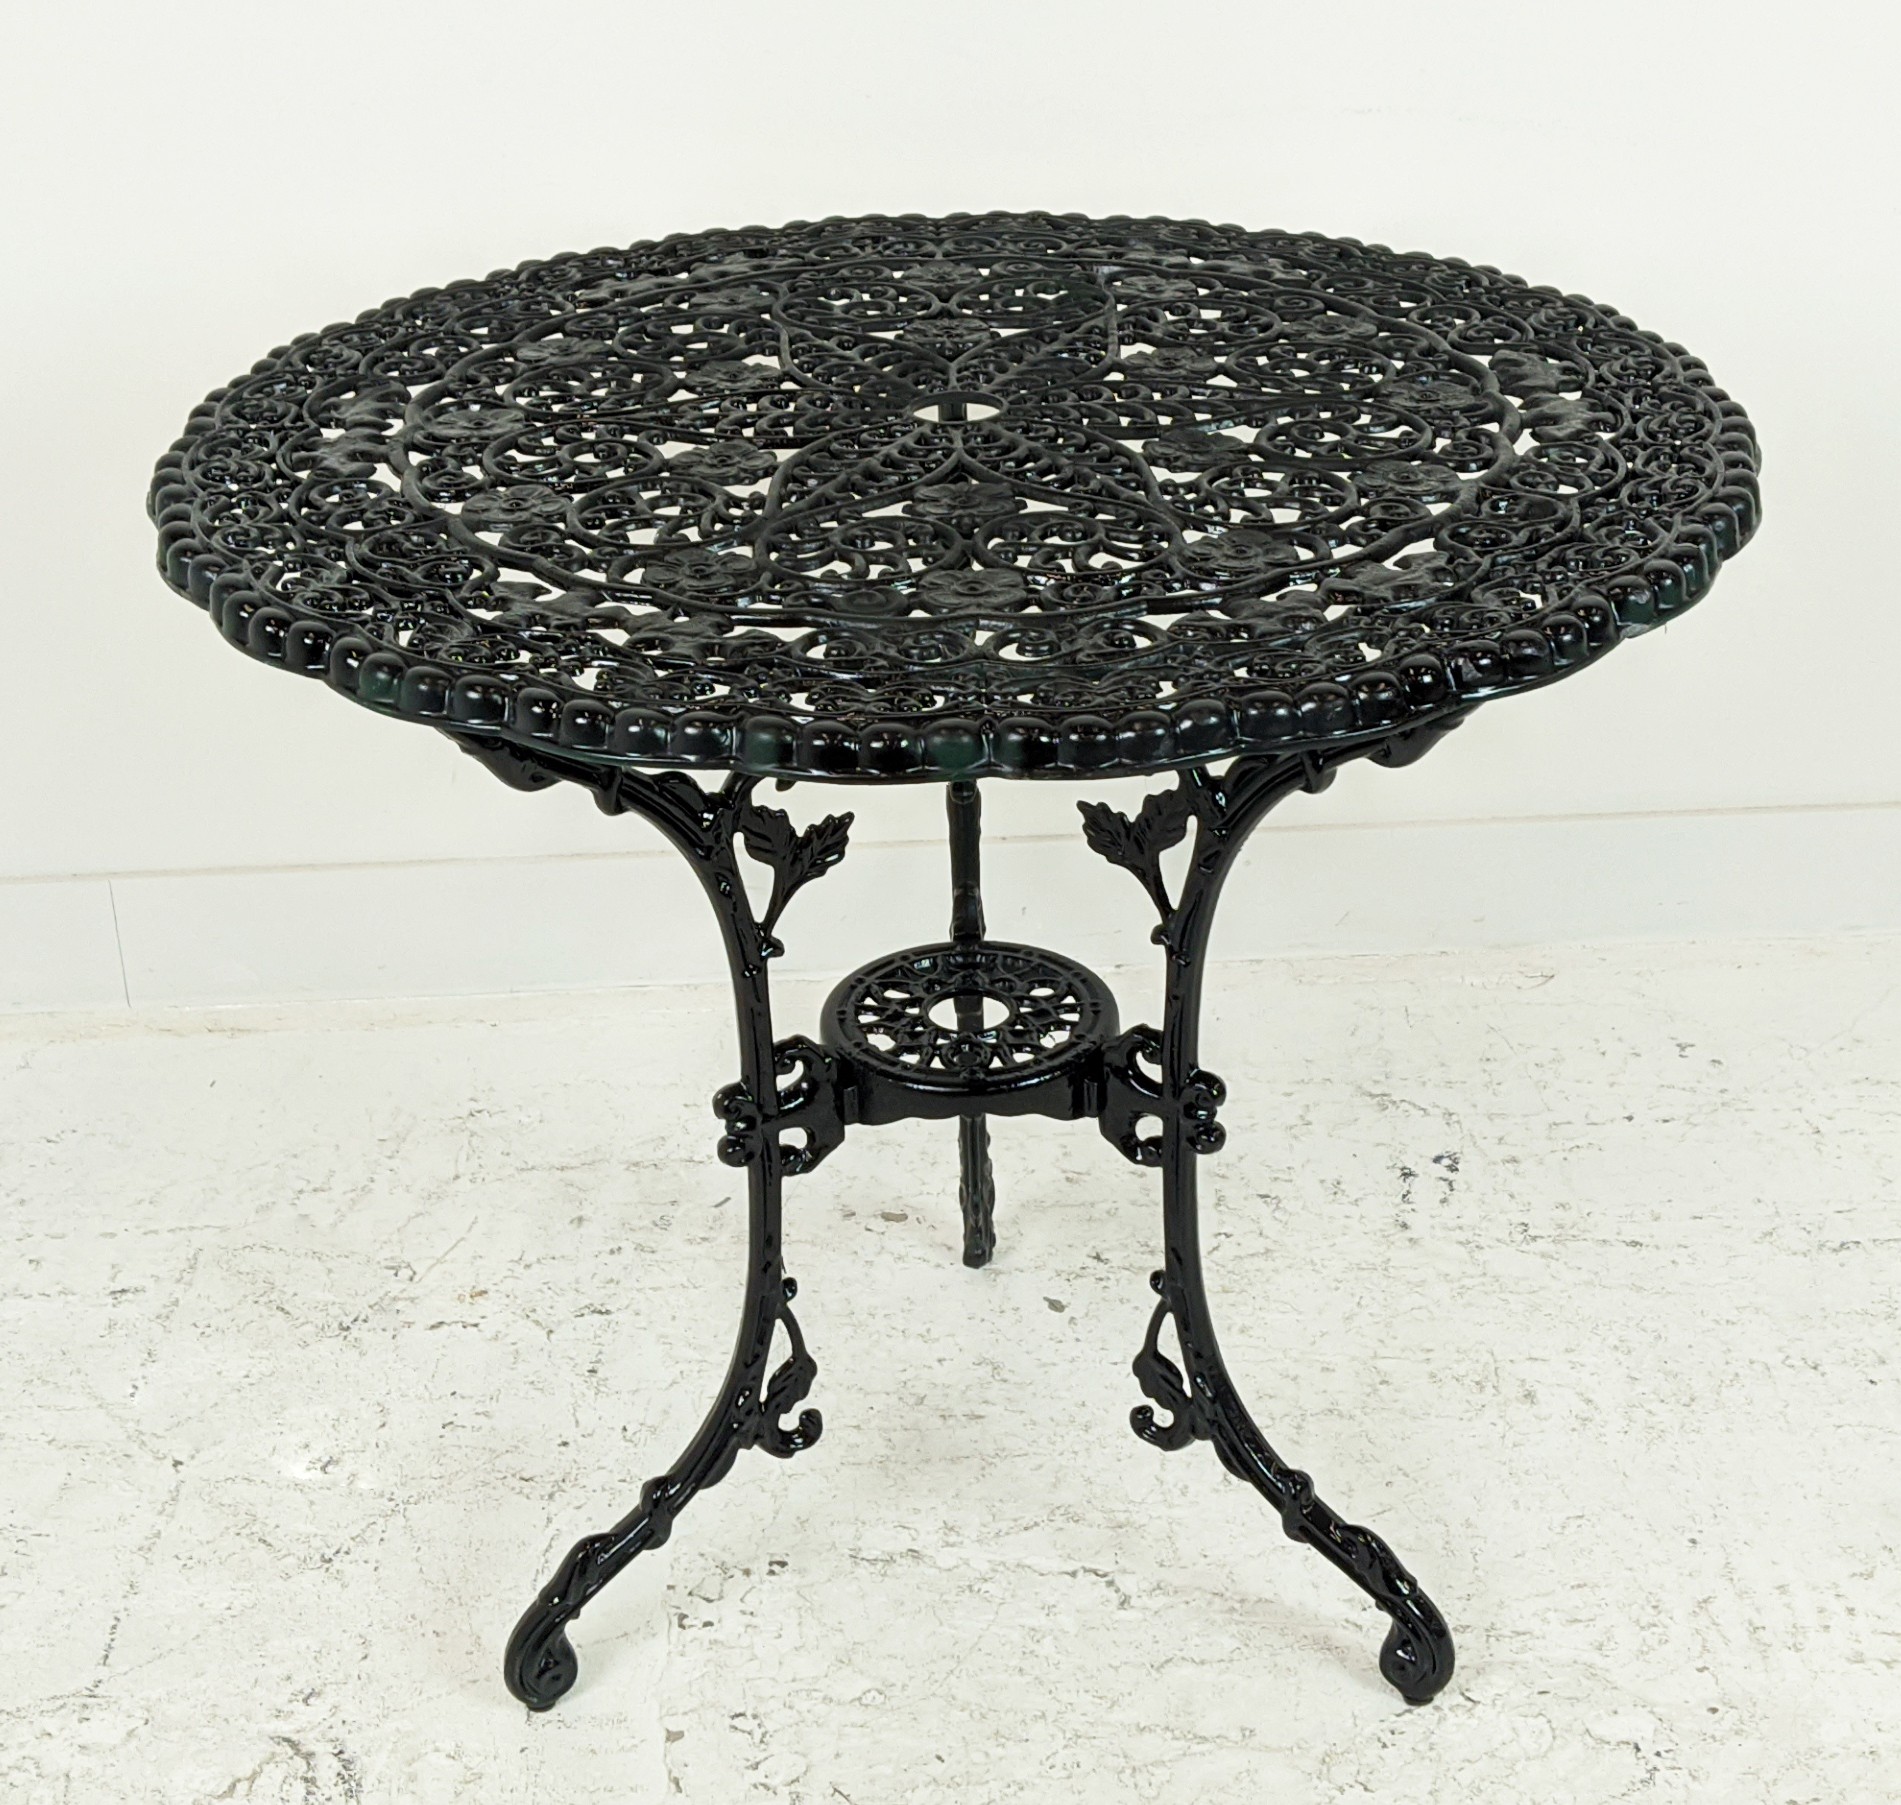 CIRCULAR GARDEN TABLE, black metal, 72cm H x 80cm and a set of four chairs, 85cm H x 42cm. (5) - Image 6 of 8